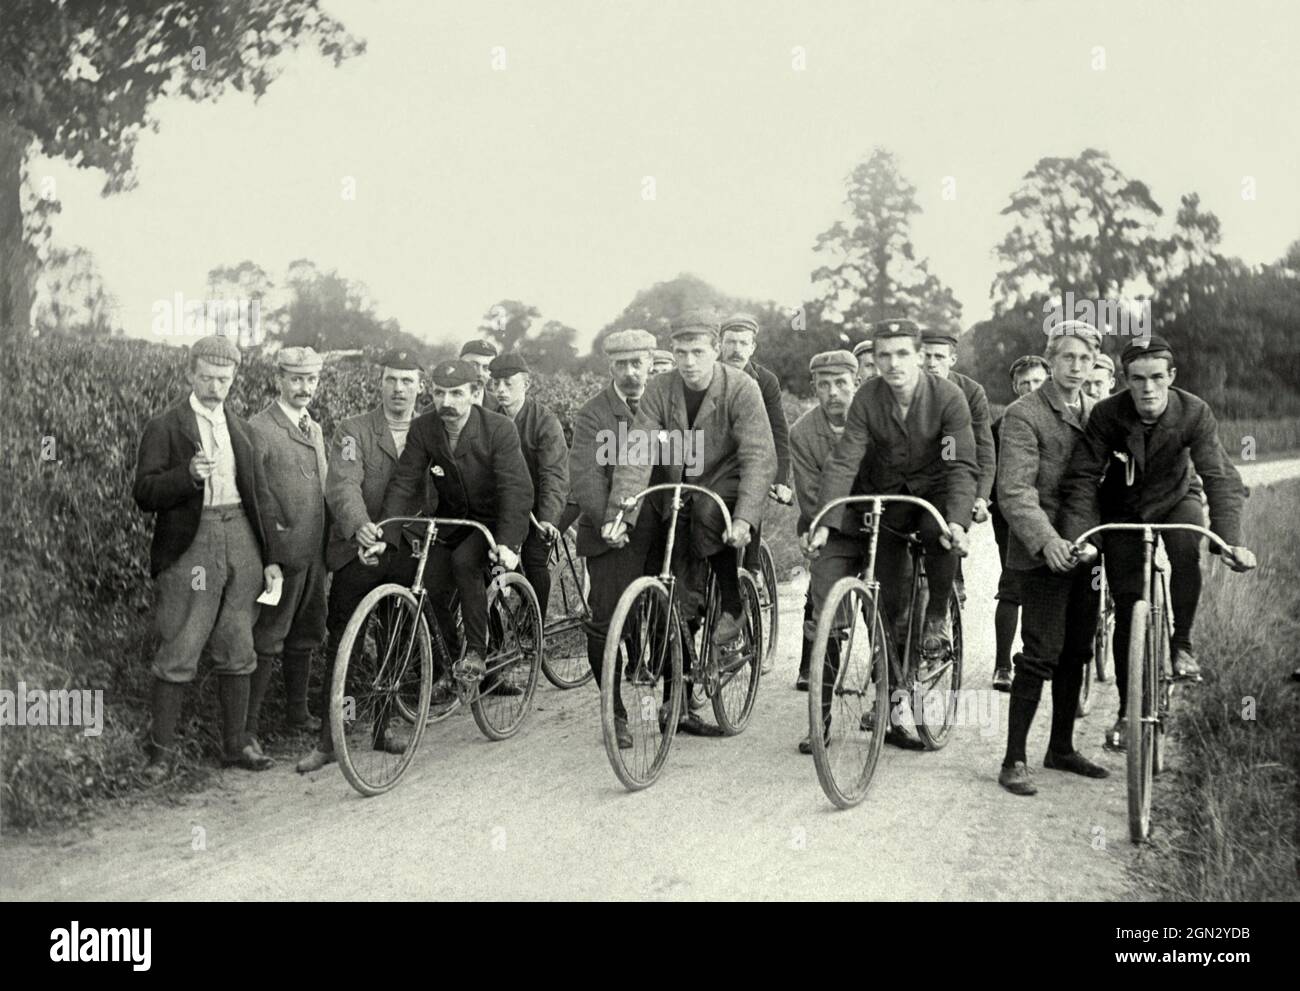 Cycling in Britain in the Victorian age. Here a group of riders are about to set off on a race or time trial on rural backroads c.1900. The starter is on the left and other officials assist each of the eight competitors. The cyclists are wearing surprisingly modern-looking gear with crew-neck sweatshirts or T-shirts and soft leather shoes that have similarities with today’s lightweight trainers. Everyone isa wearing a cap. This is taken from a small image in an old photograph album – a vintage sporting photograph. Stock Photo